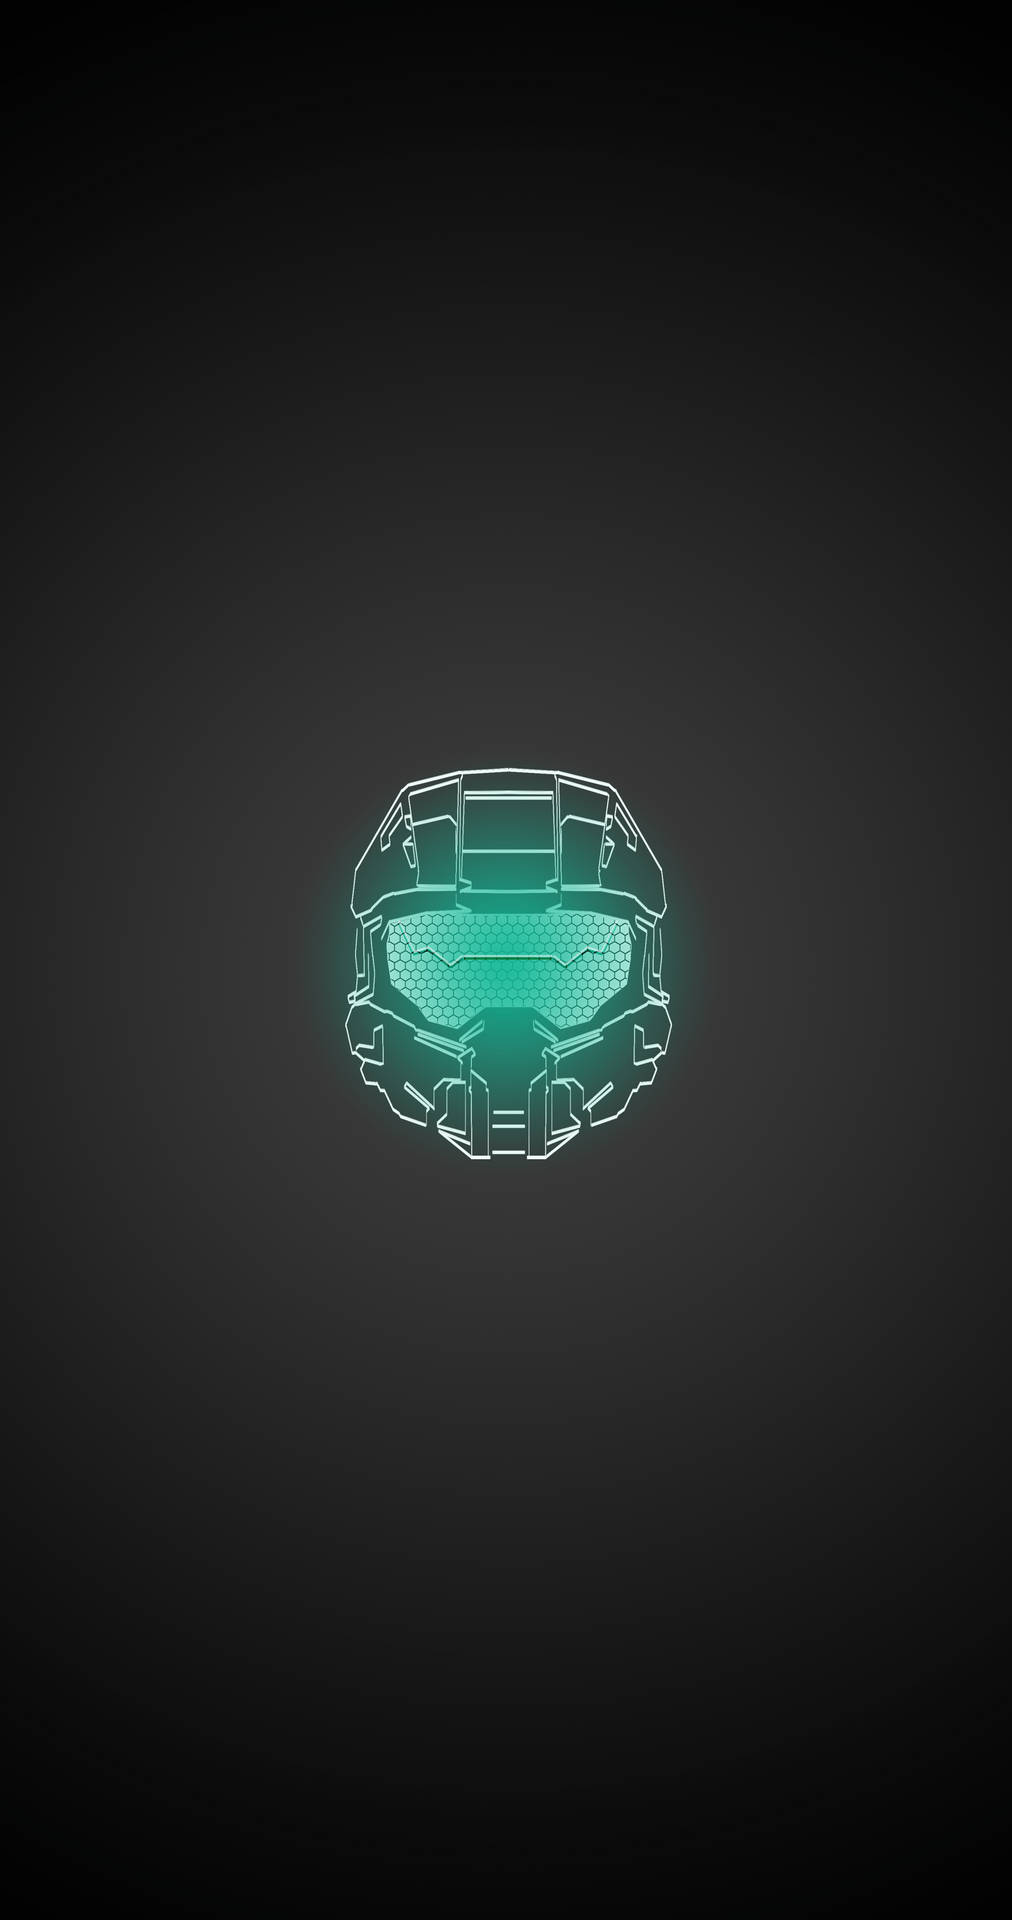 Top 999+ Halo Logo Wallpapers Full HD, 4K✅Free to Use